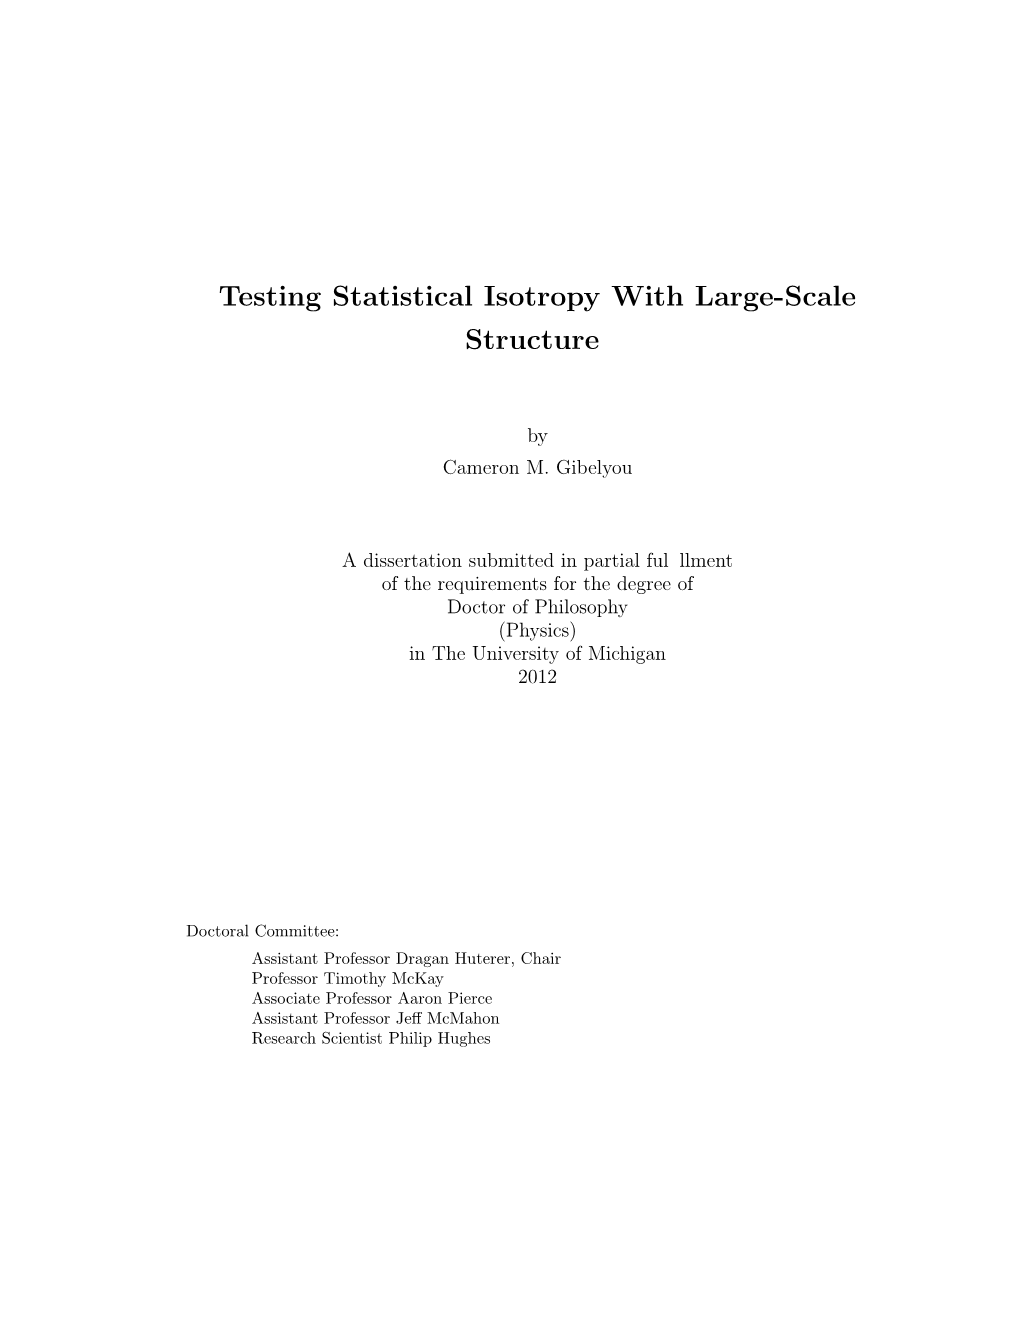 Testing Statistical Isotropy with Large-Scale Structure